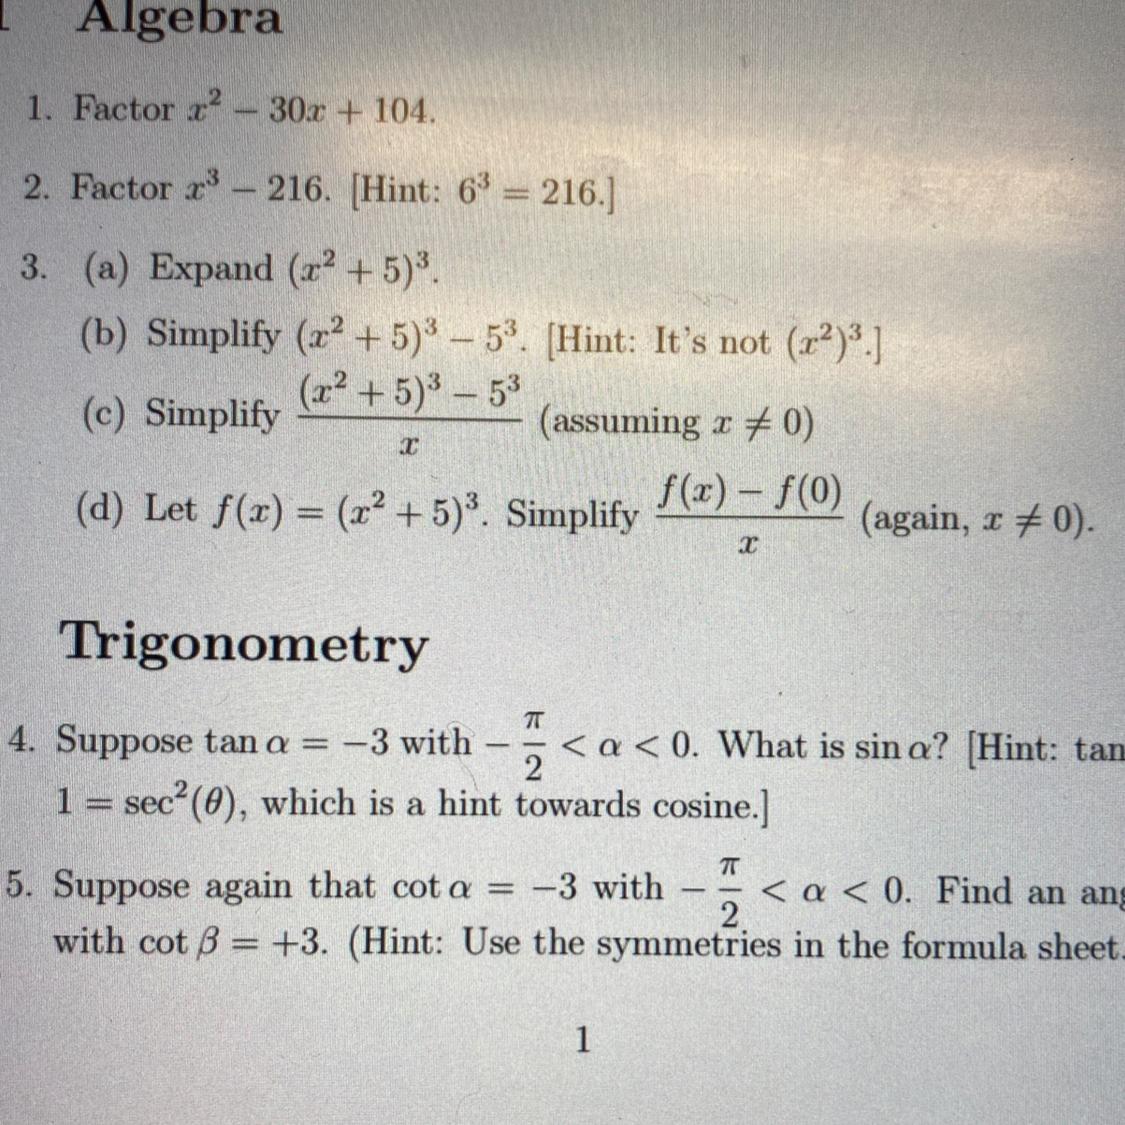 Im Not Sure How To Solve 3d. College Calculus 1